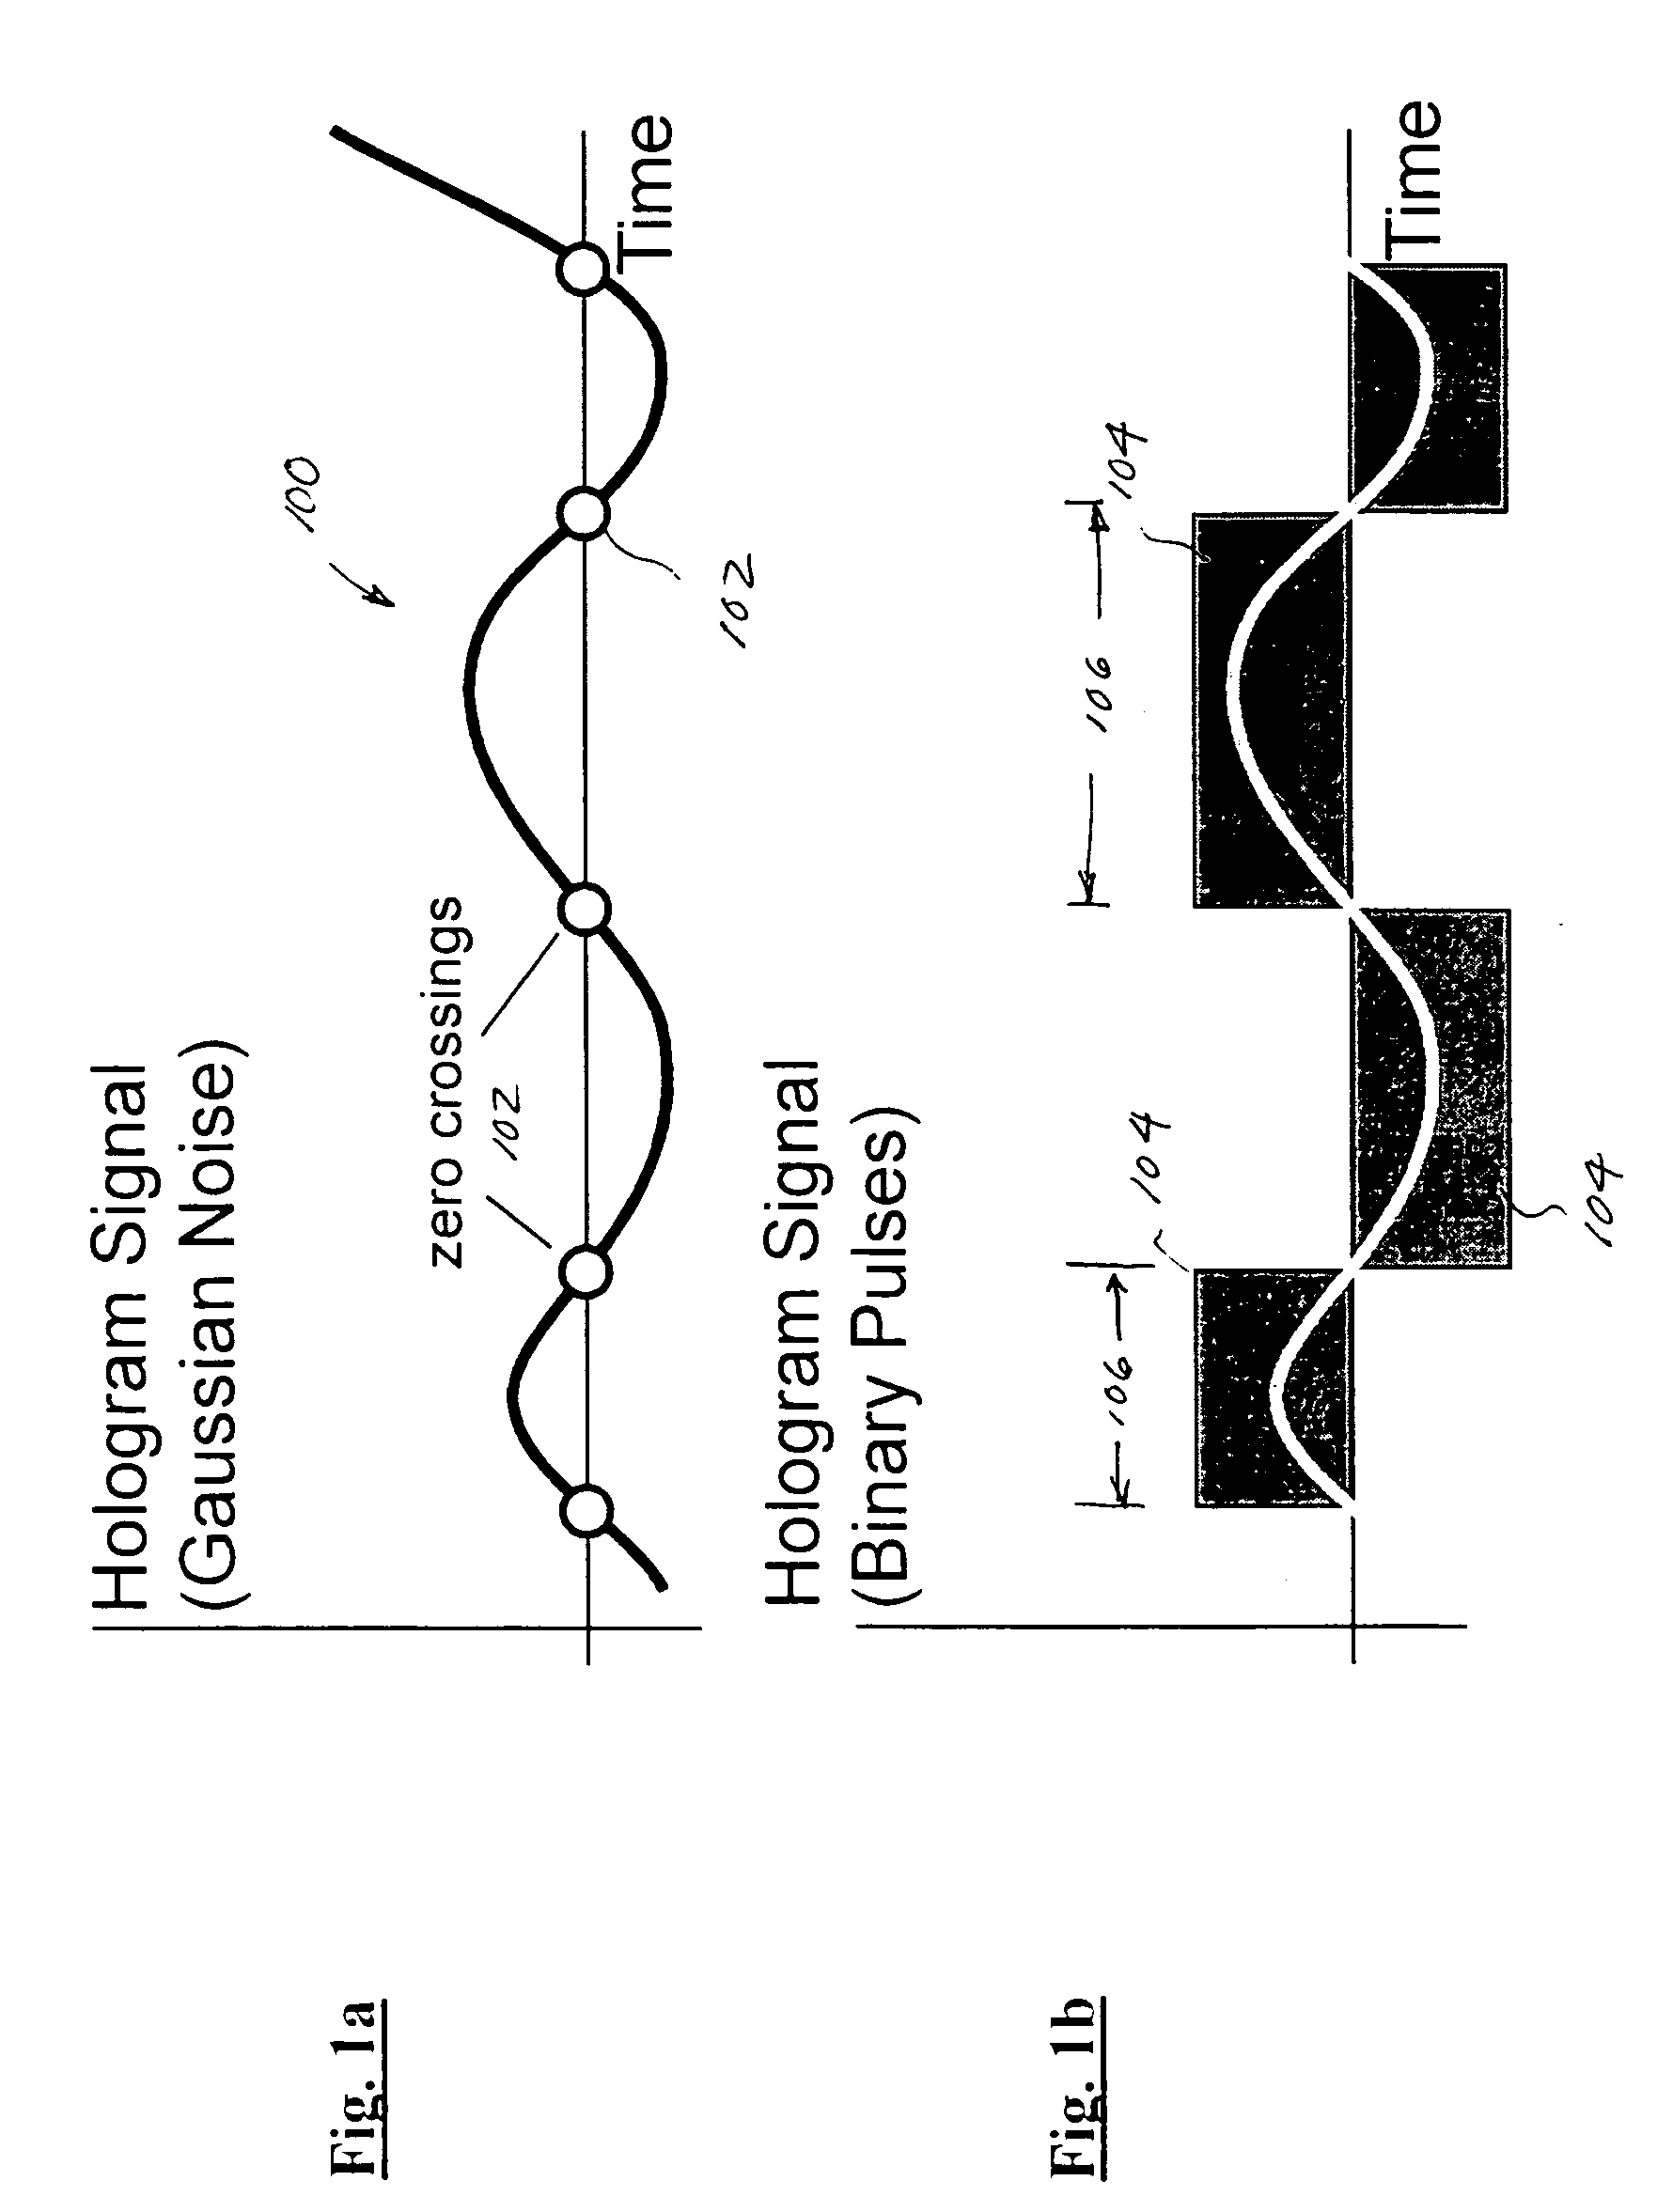 Epoch-variant holographic communications apparatus and methods